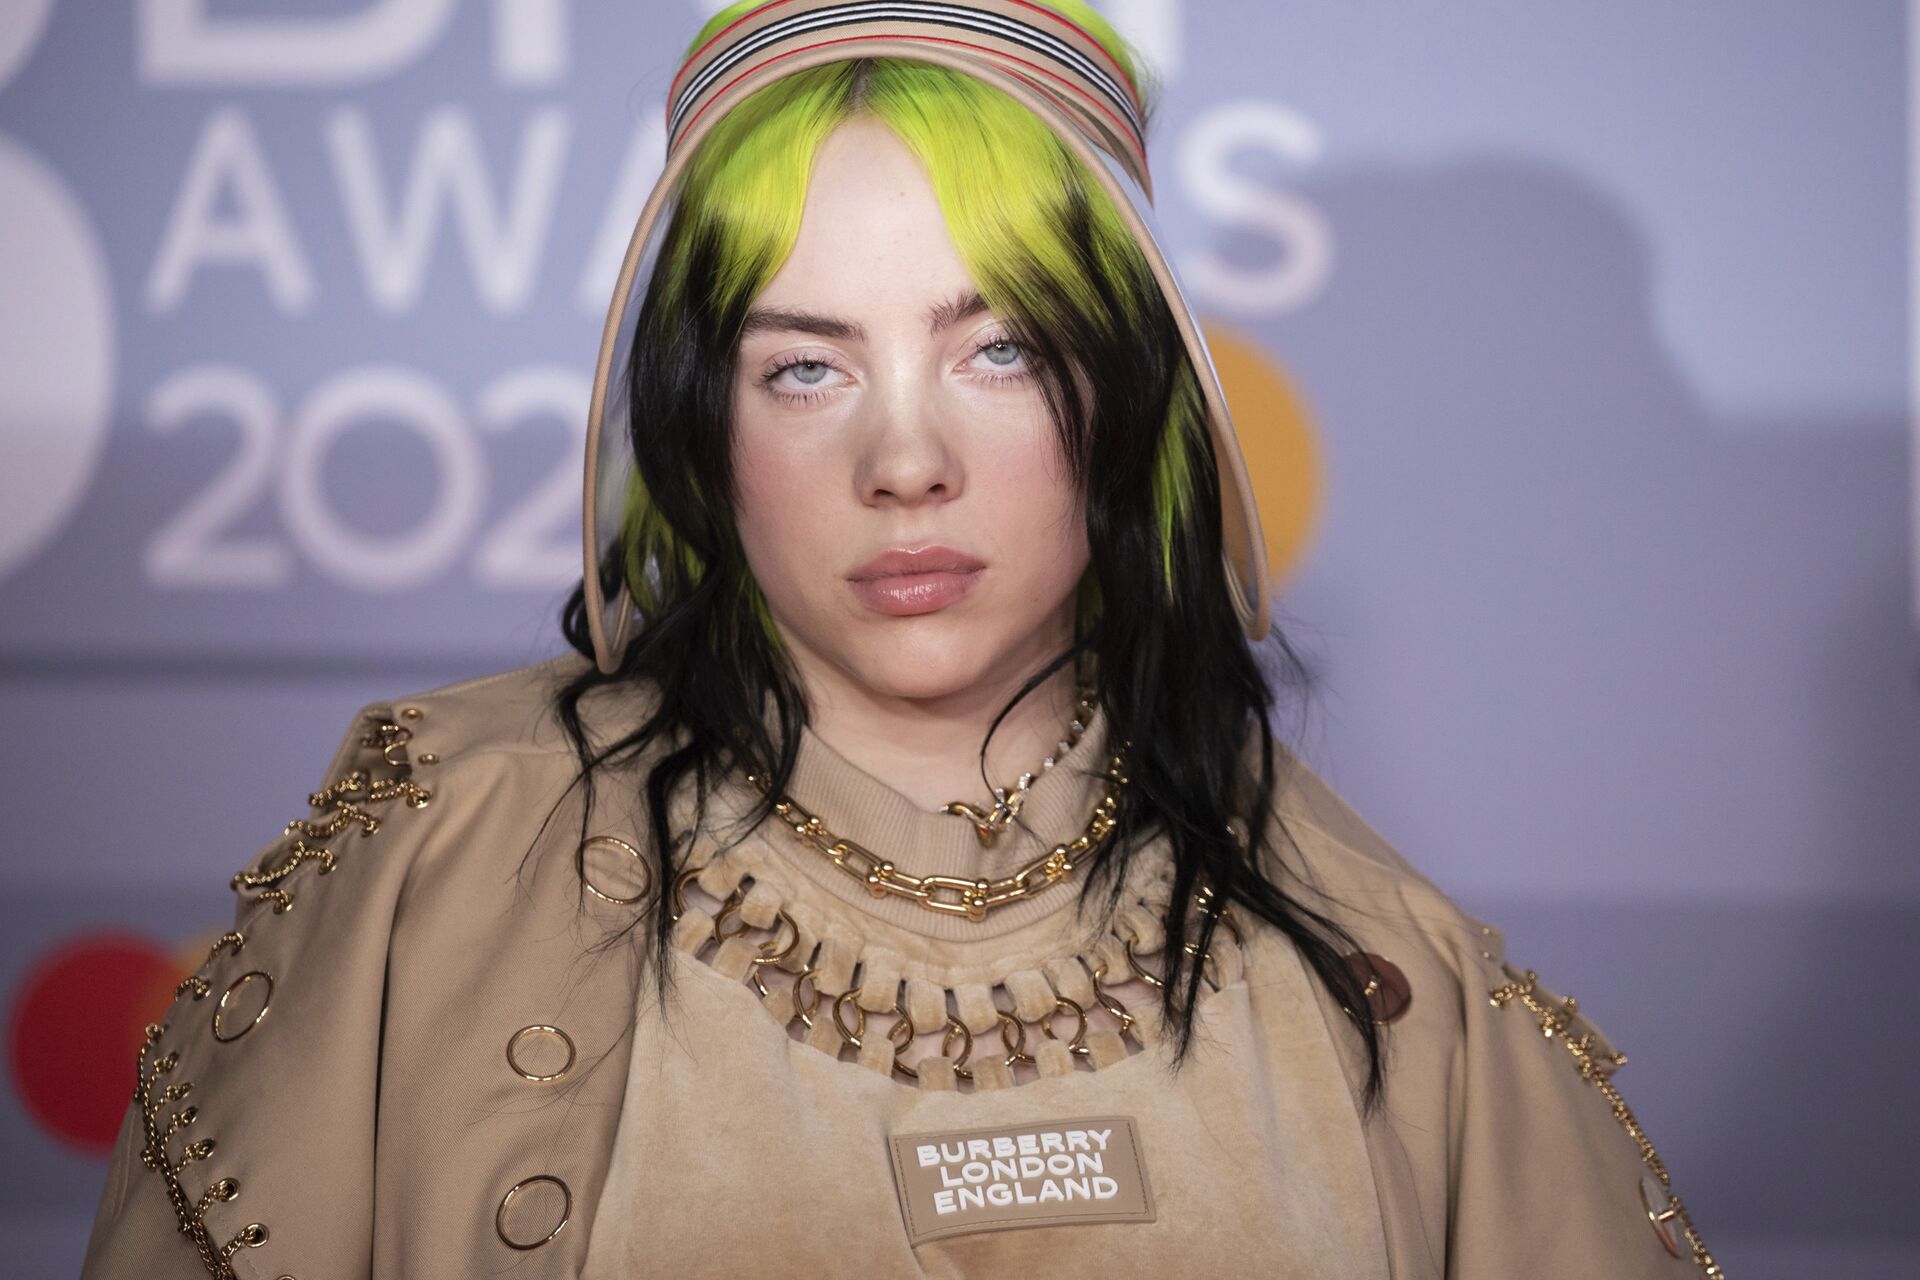 ‘Appalled and Embarrassed’: Billie Eilish Apologises For Racial Slur in Recently Surfaced Video - Sputnik International, 1920, 22.06.2021